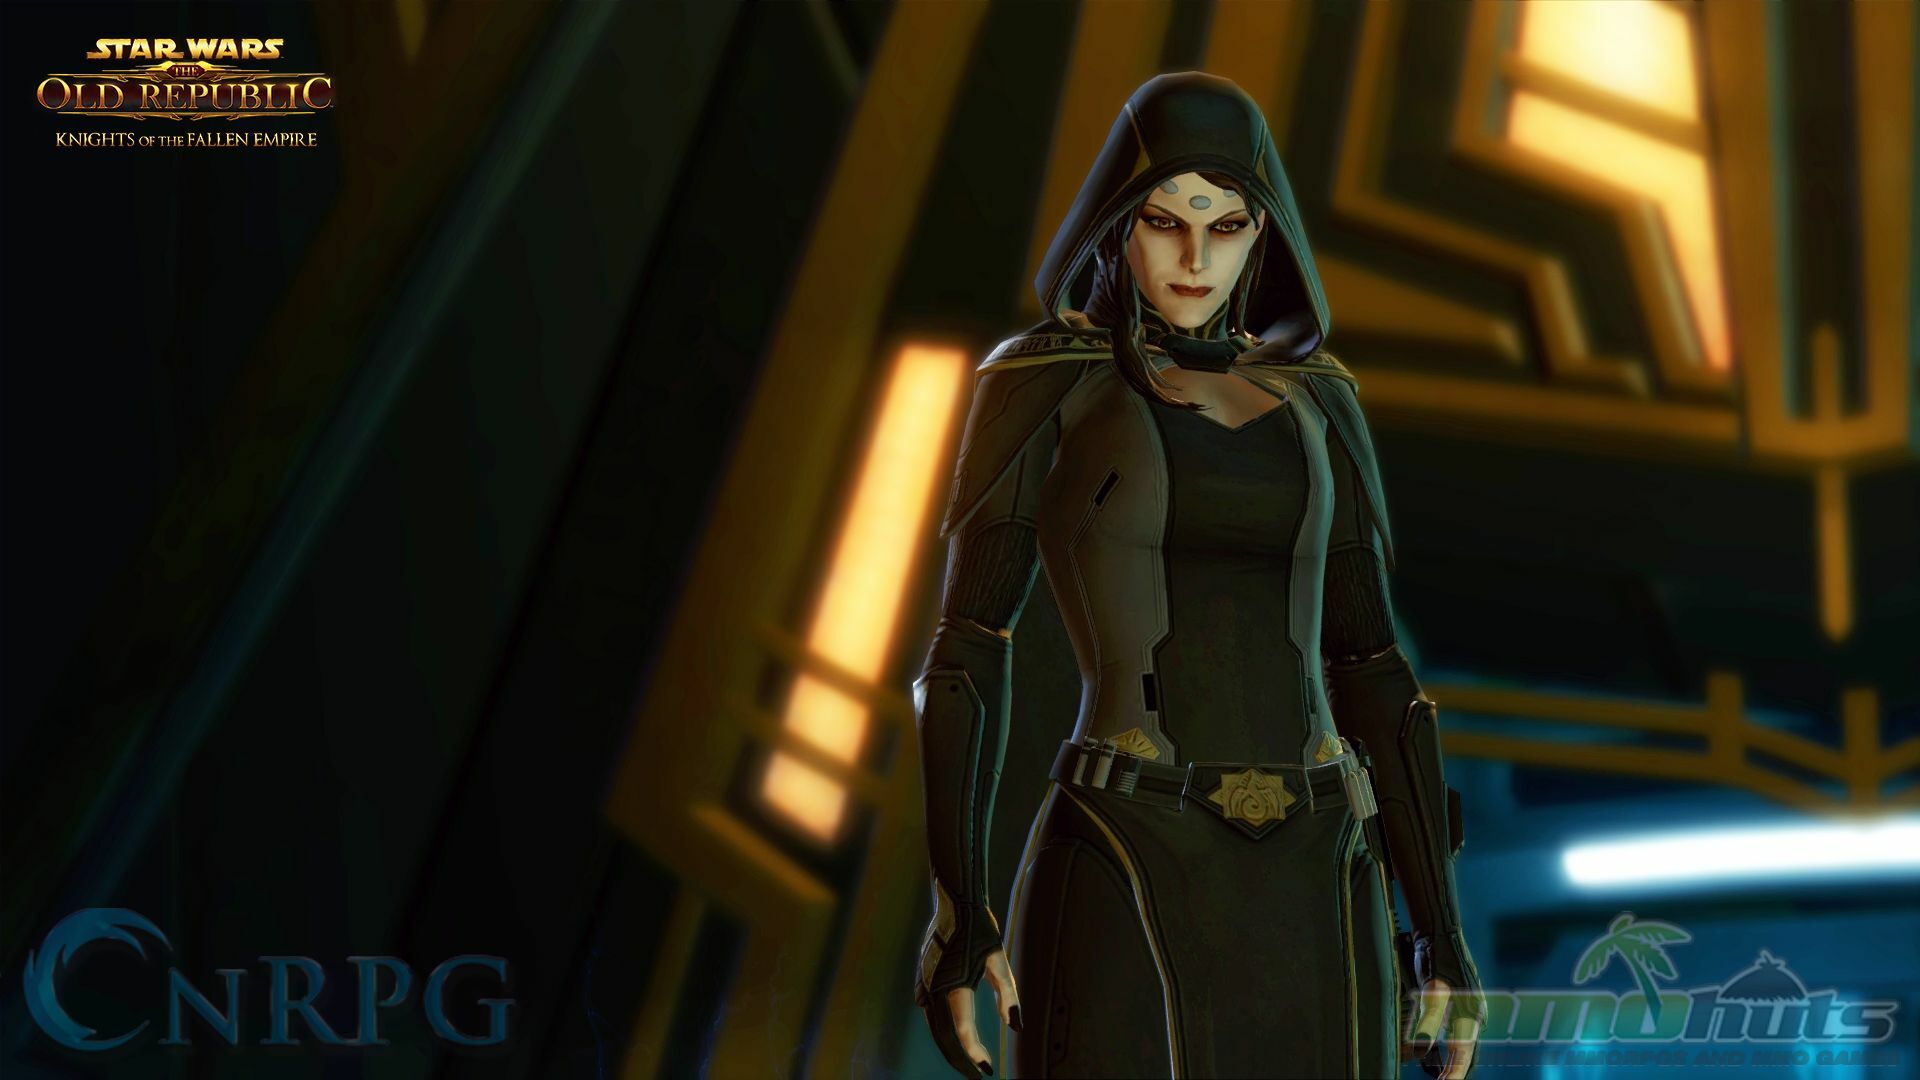 SWTOR: Knights of the Fallen Empire Press Event Preview